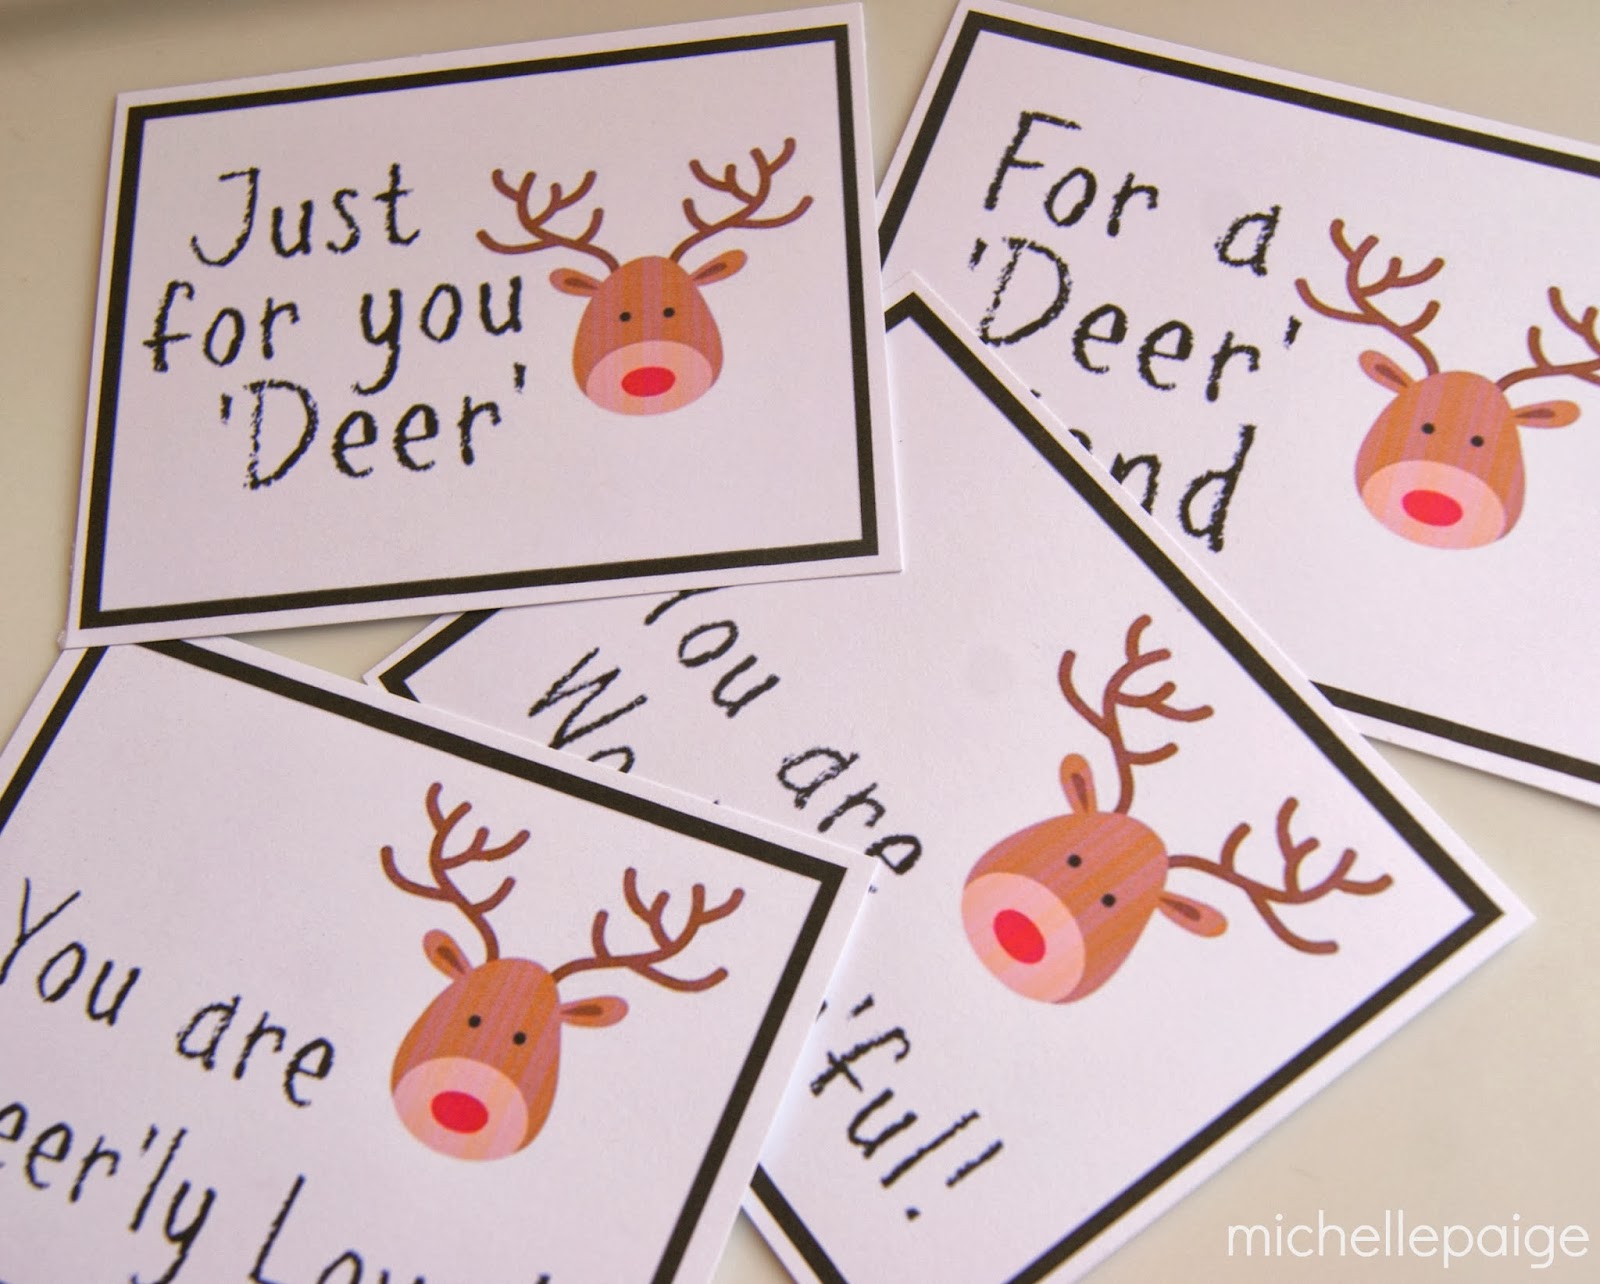 michelle-paige-blogs-printable-reindeer-gift-tags